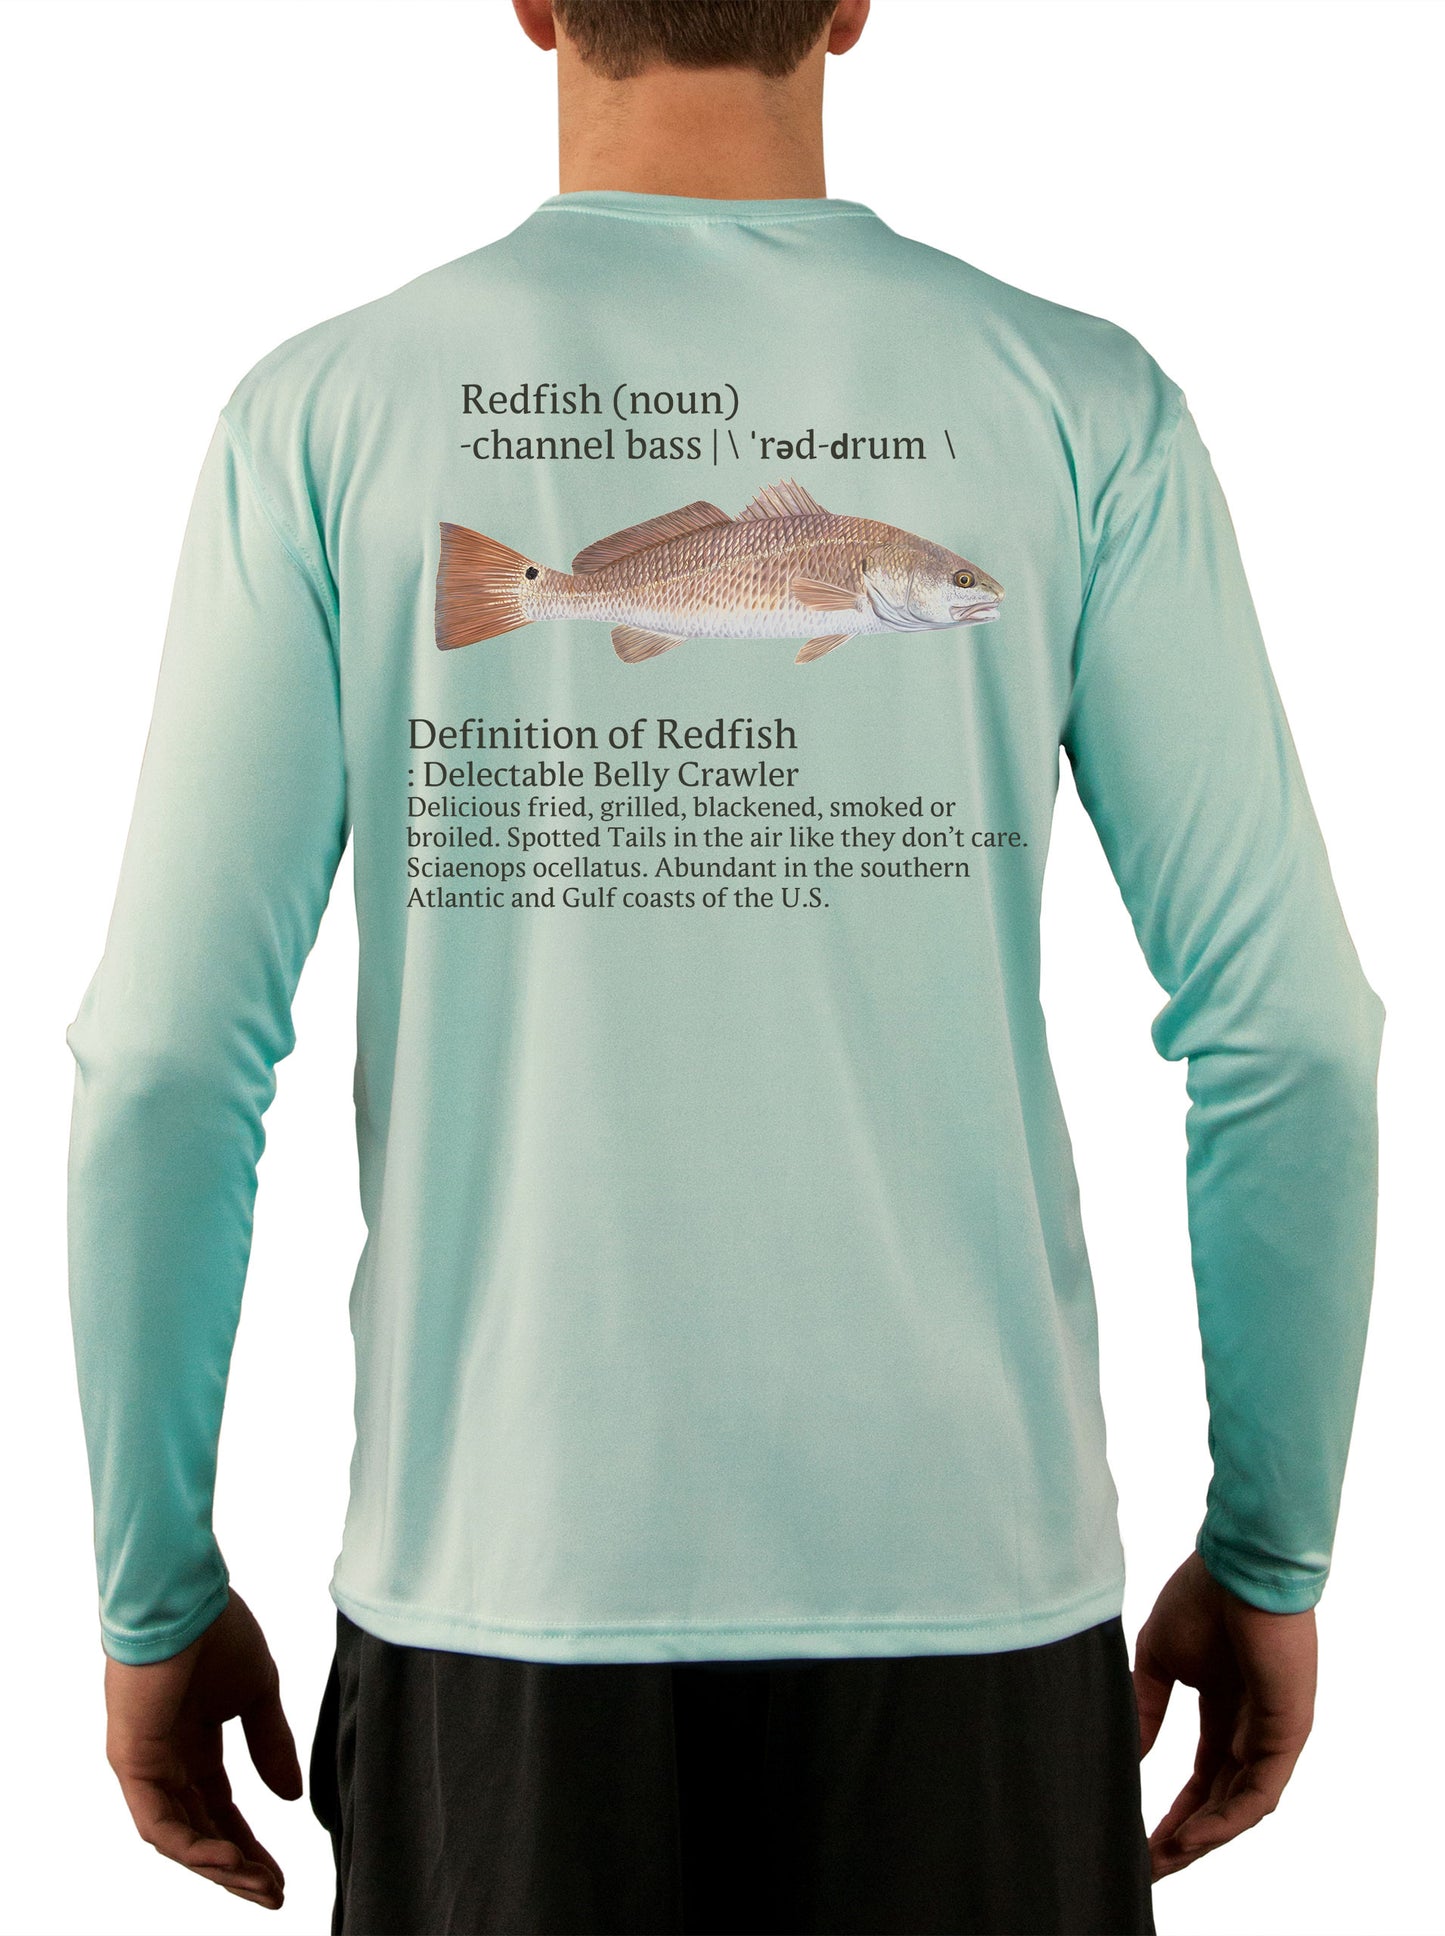 Redfish Fishing Shirts for Men Red Drum Channel Bass - UV Protected +5 –  Skiff Life